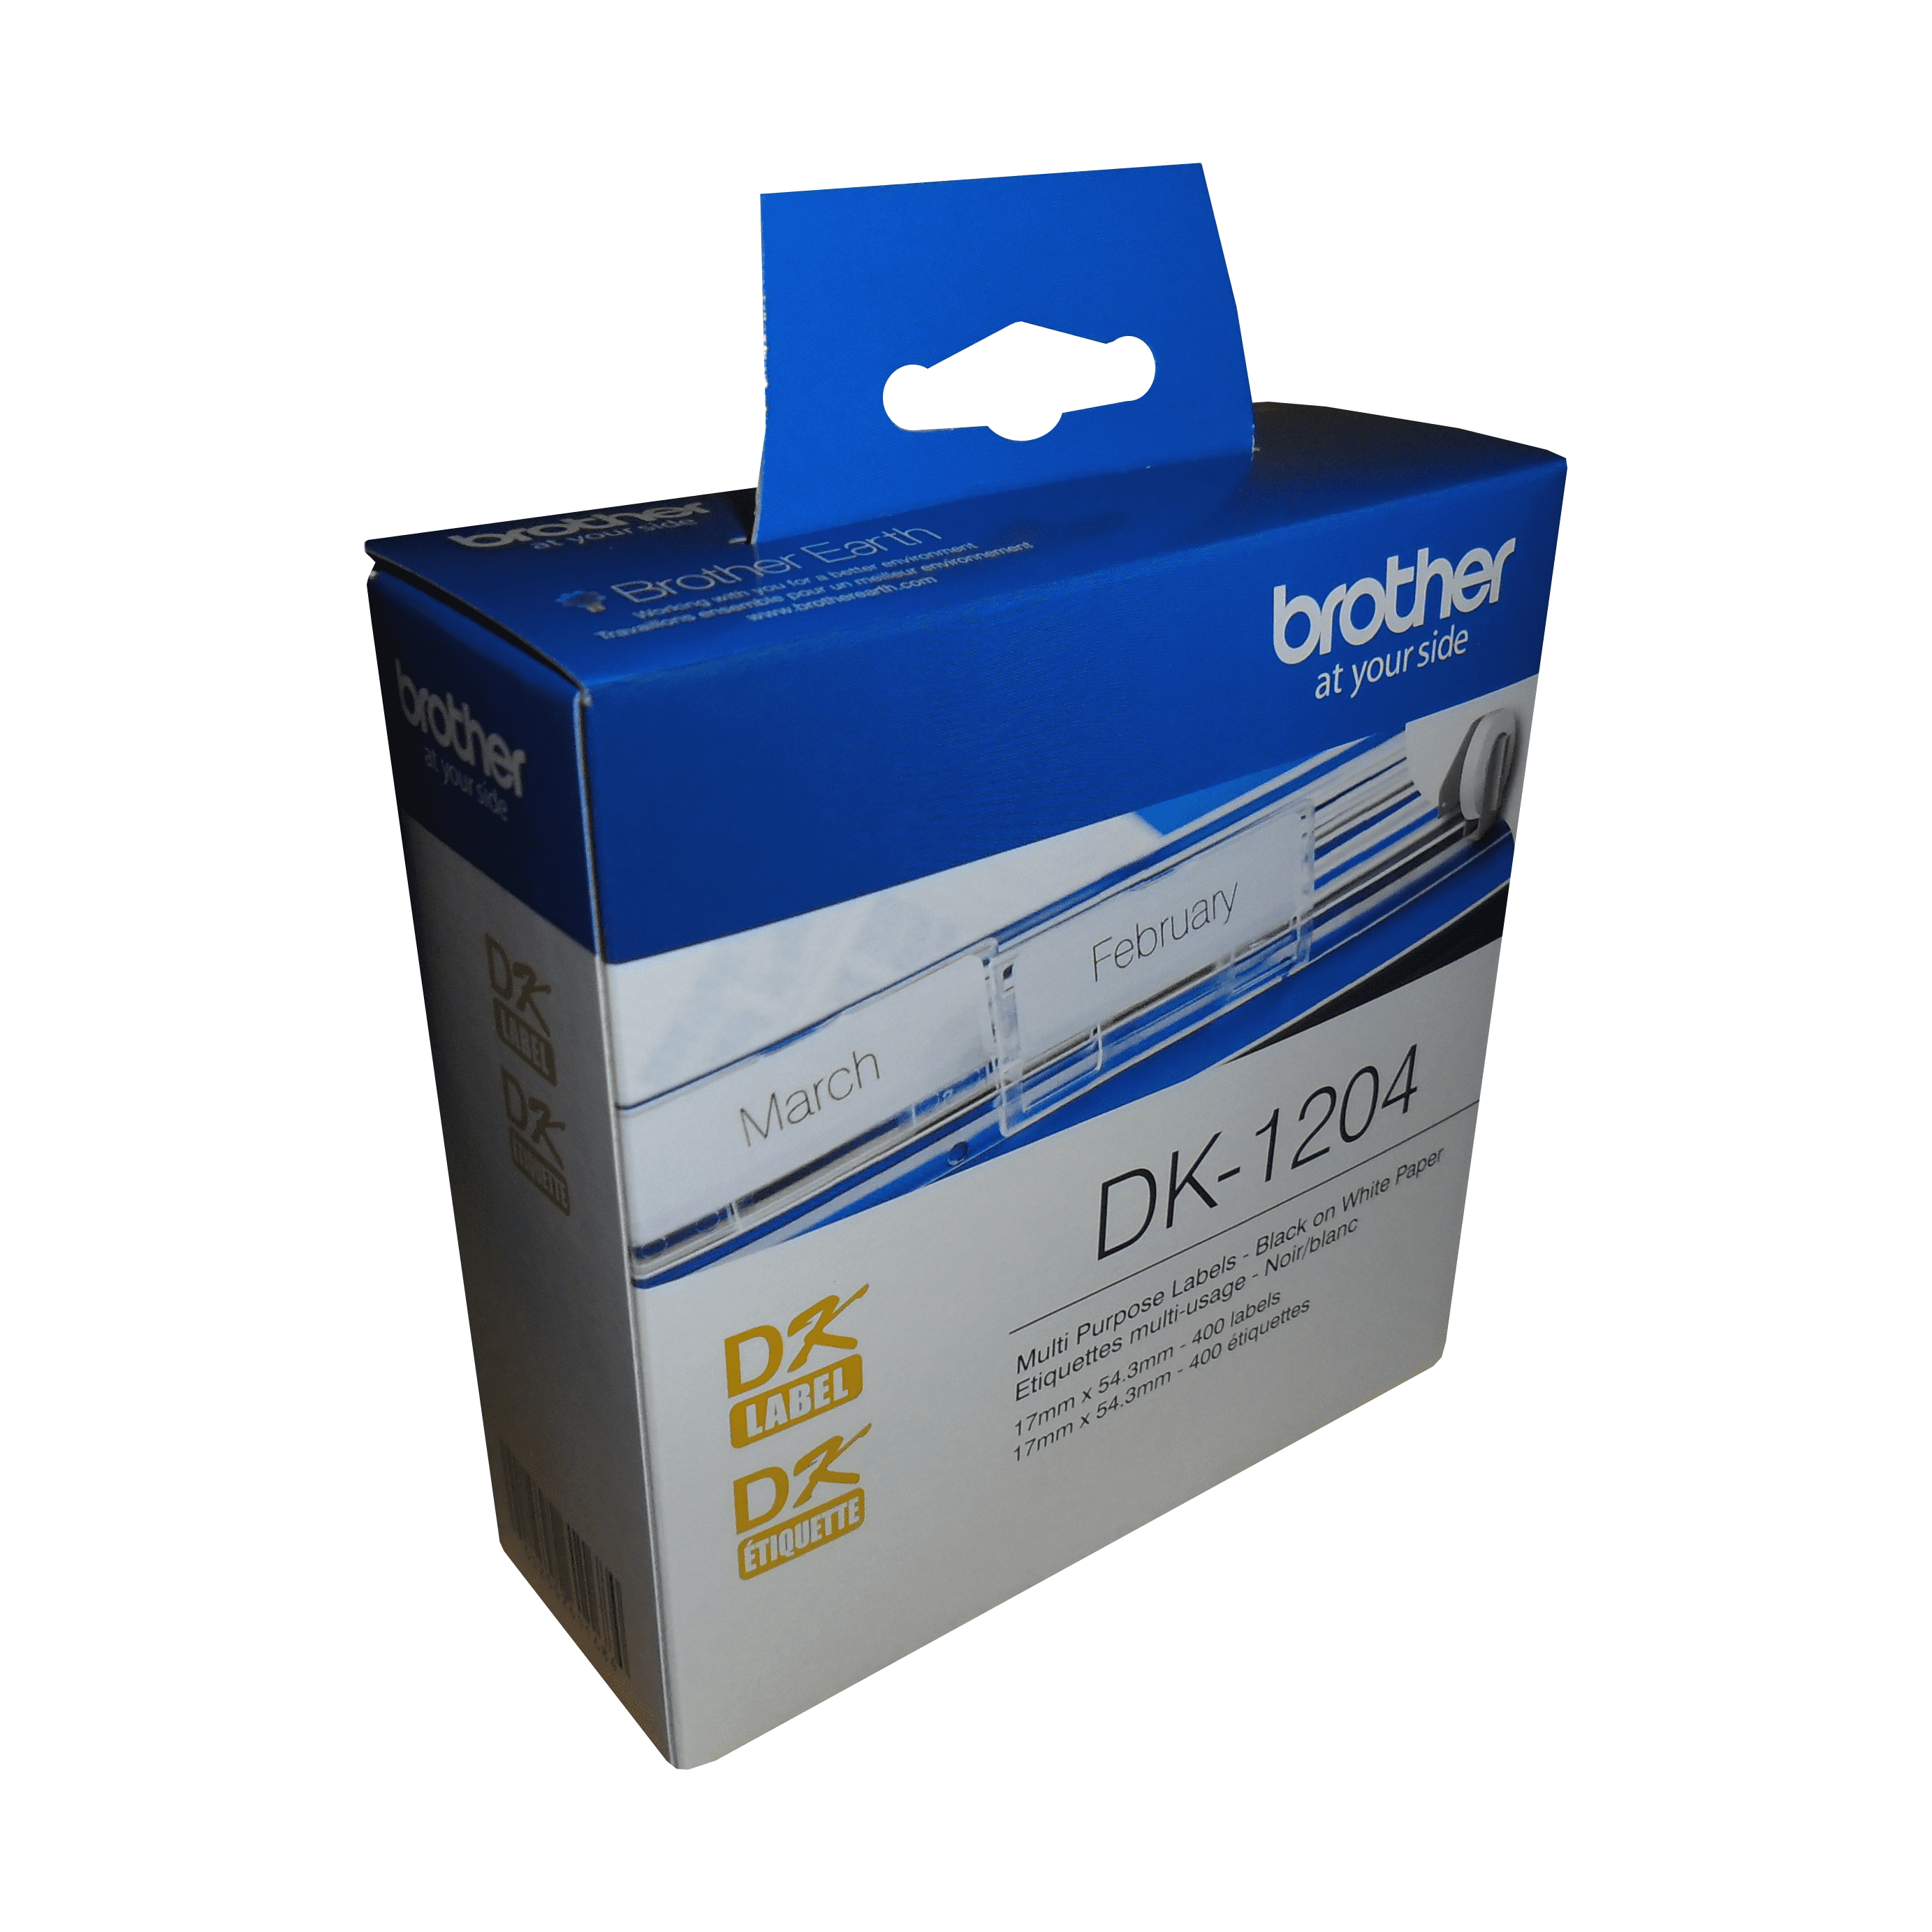 Brother DK-1204 Multi-Purpose Paper Labels (400 Labels) - 0.66" x 2.1" (17 mm x 54.3 mm)